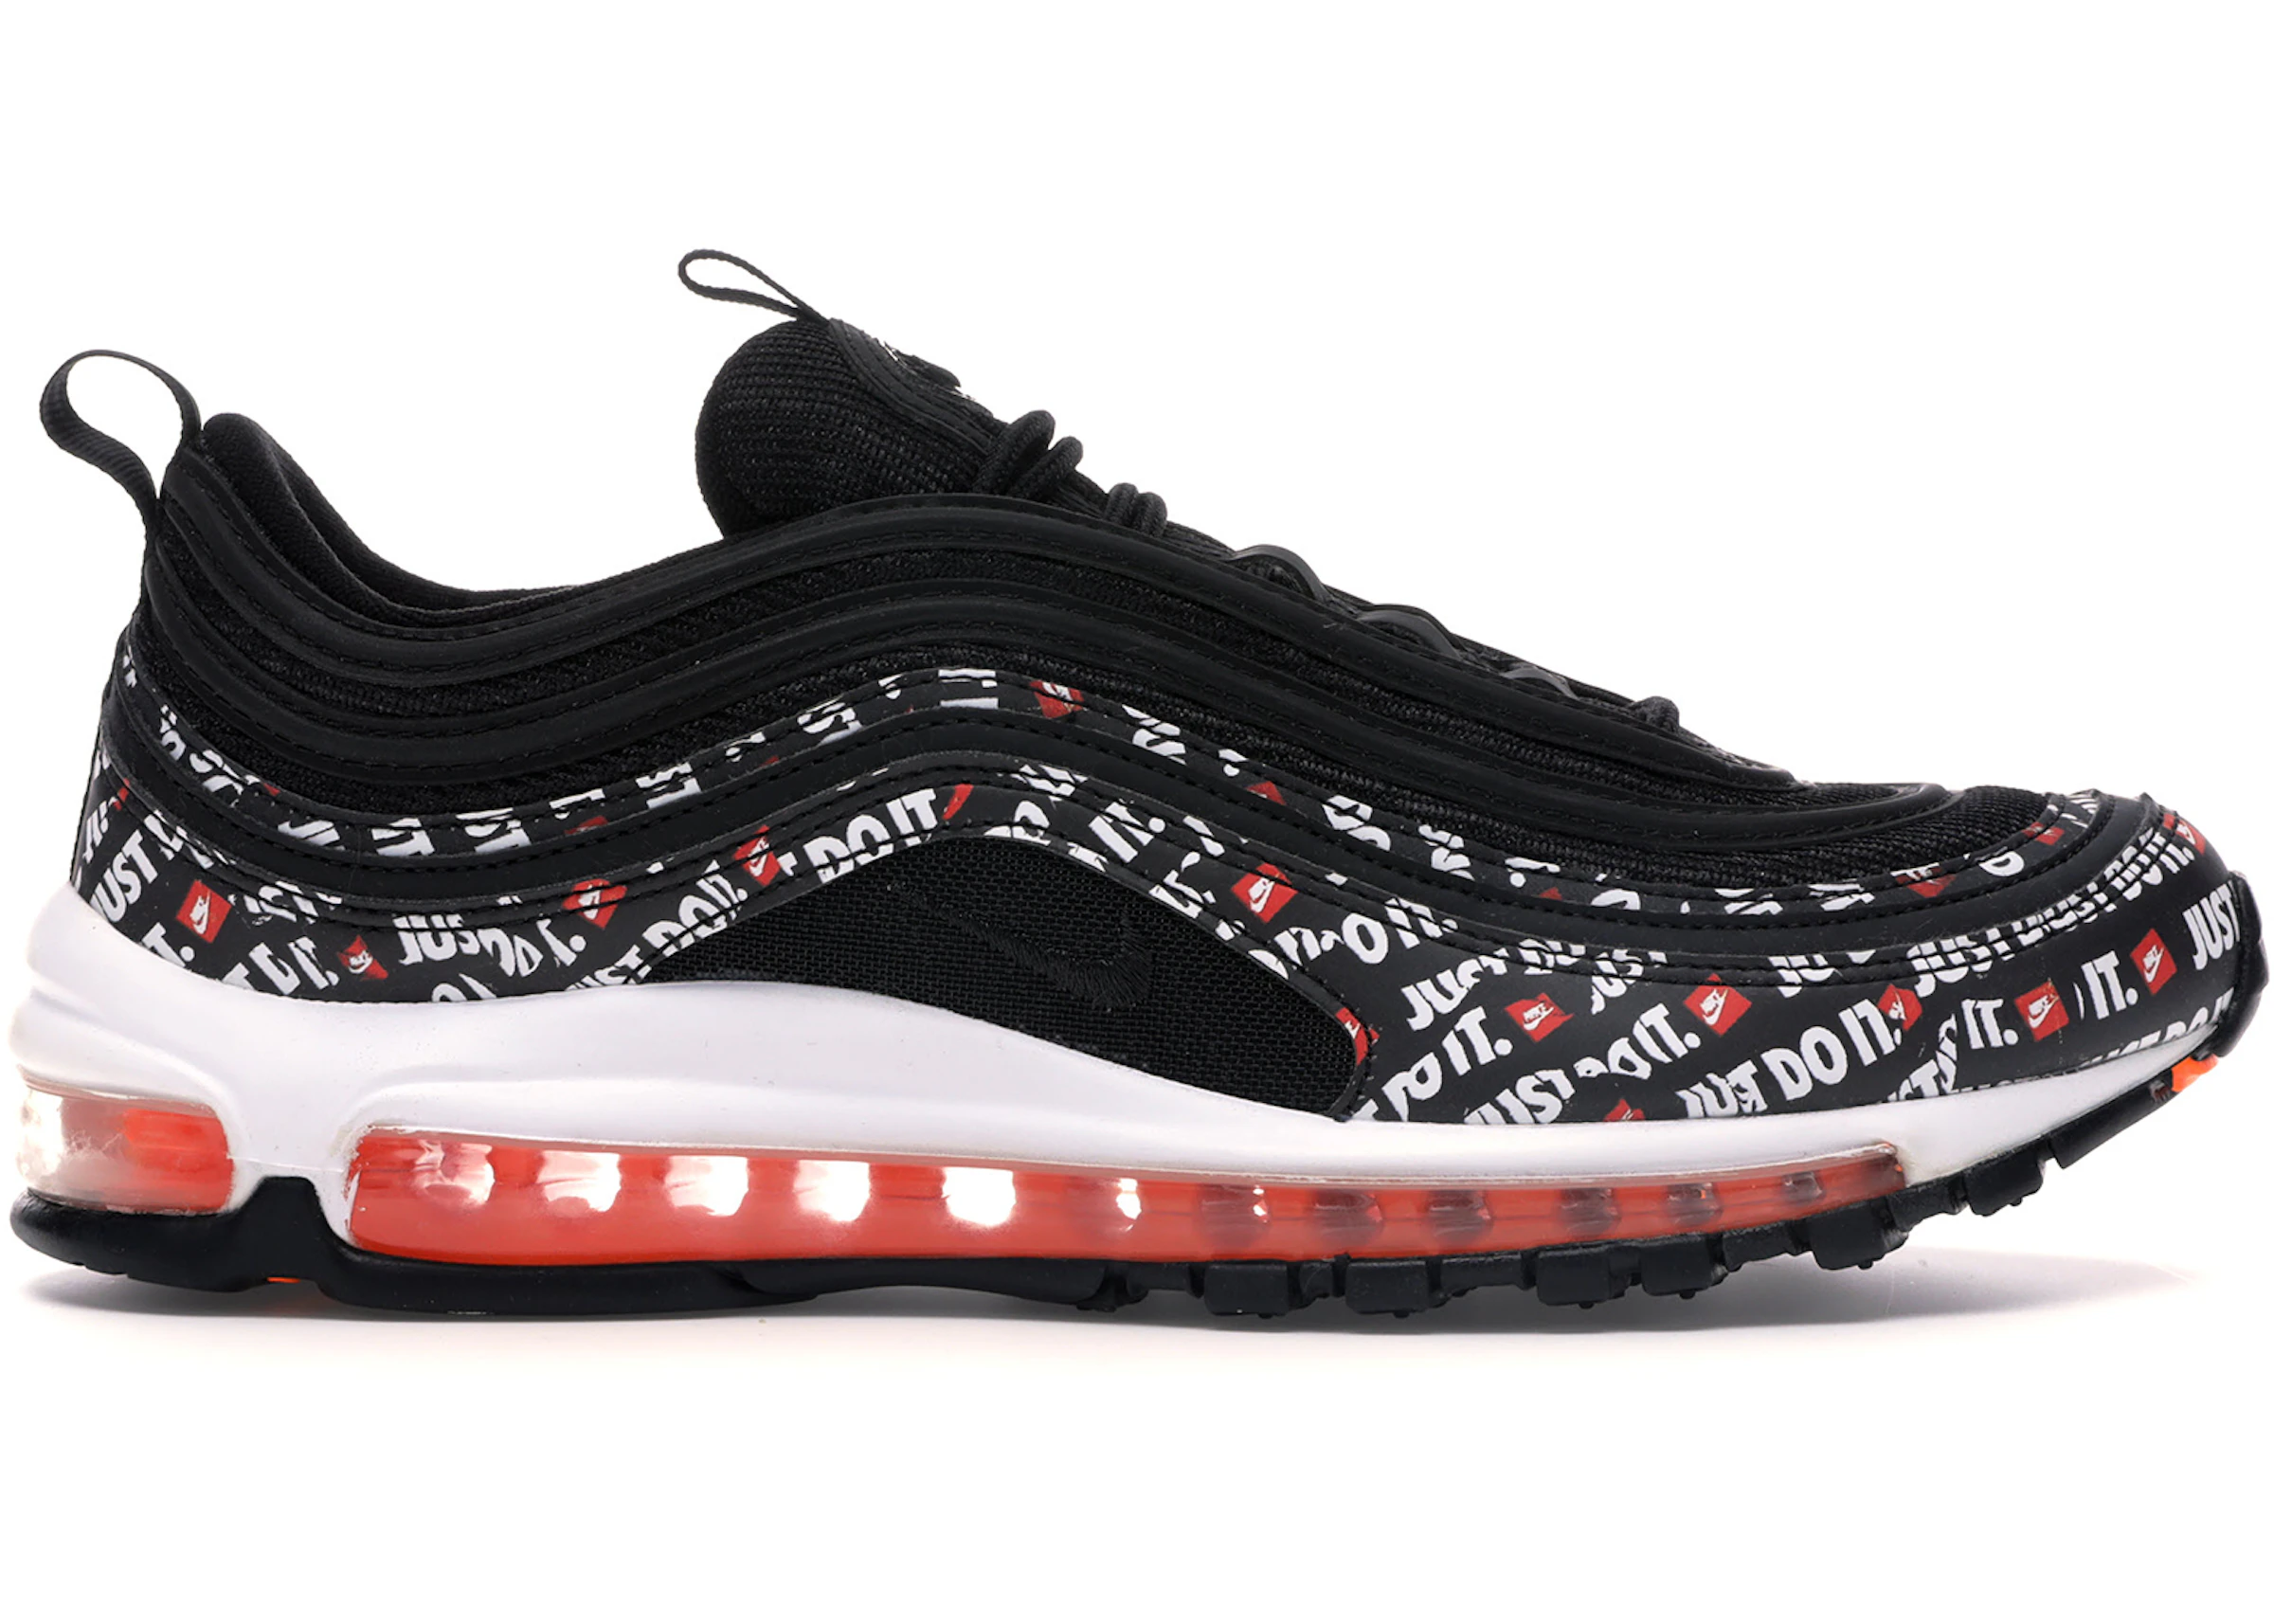 Exchange Solar eclipse Generator Nike Air Max 97 Just Do It Pack Black - AT8437-001 - US